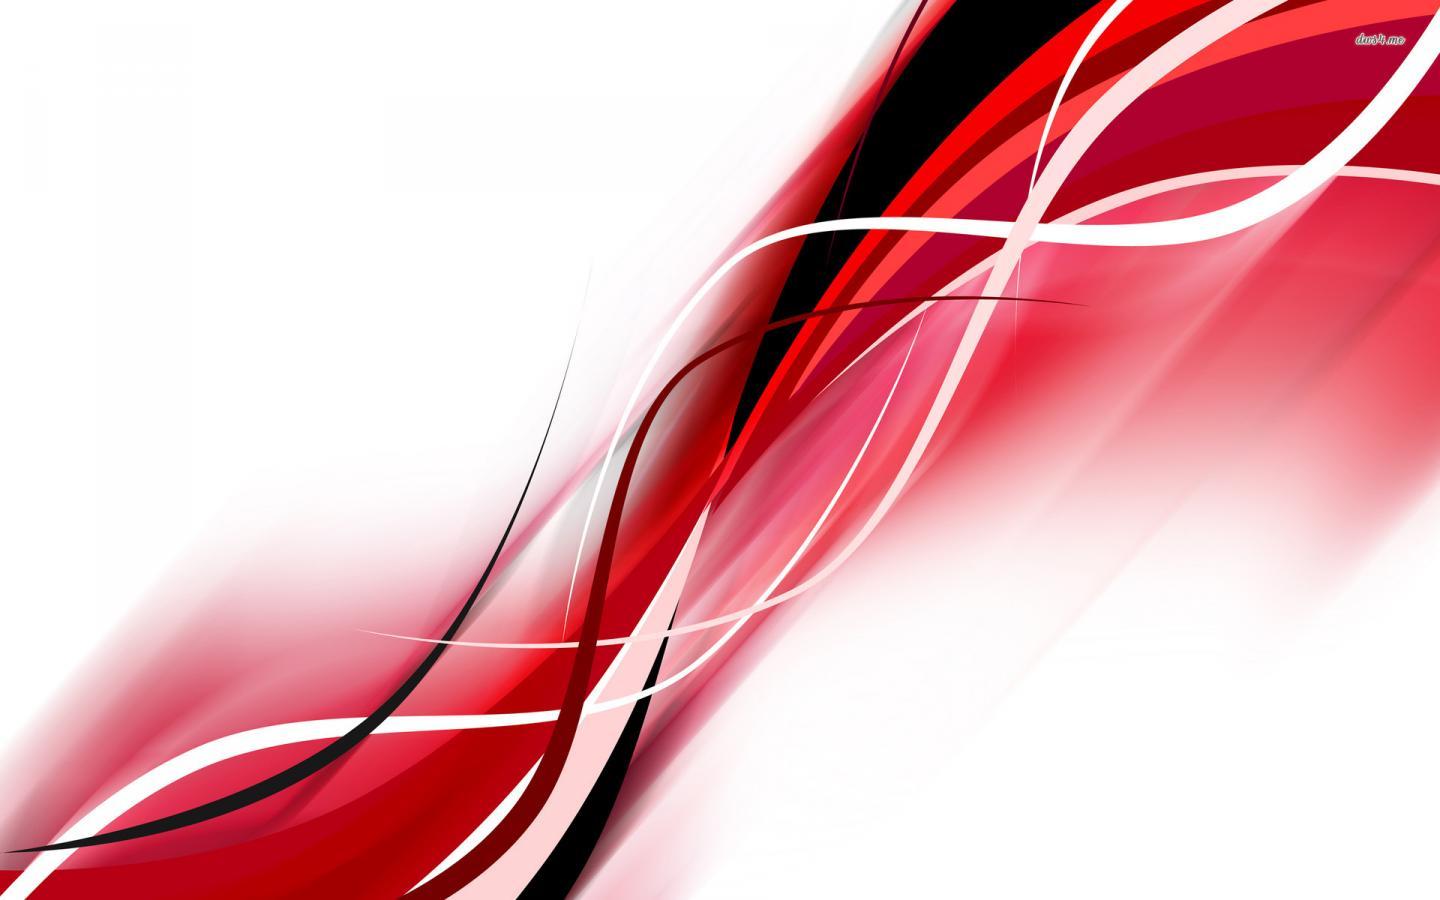 White Wallpapers Abstract Red Hd Widescreen 10 HD Wallpapers